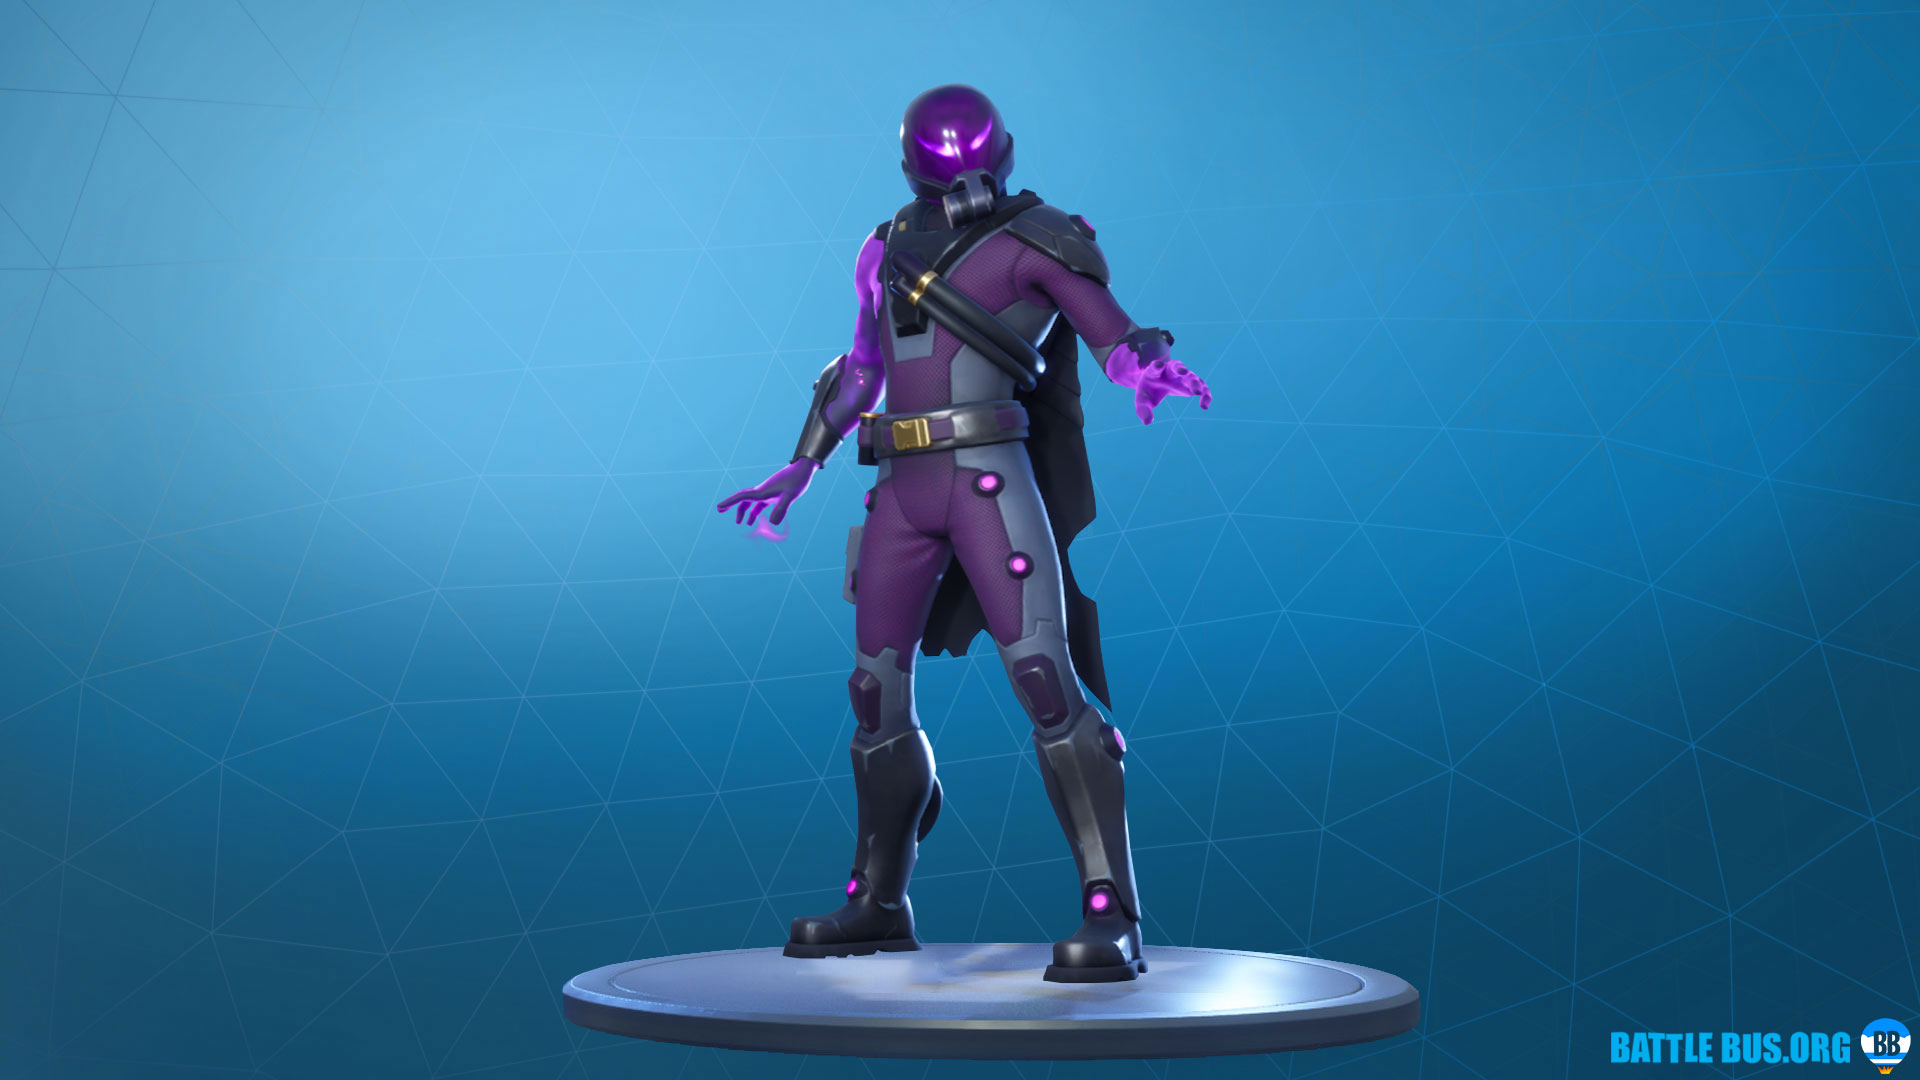 Tempest Fortnite Outfit Raging Storm Set